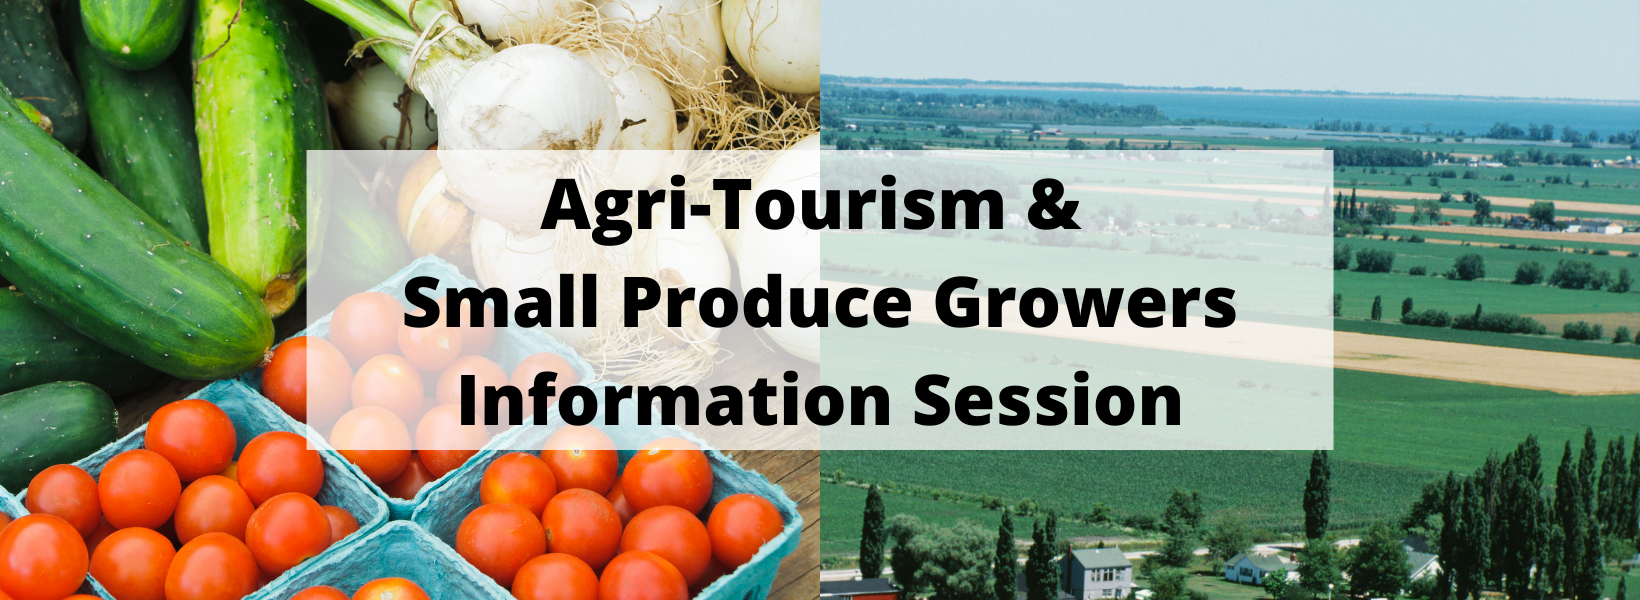 agri tourism business for sale